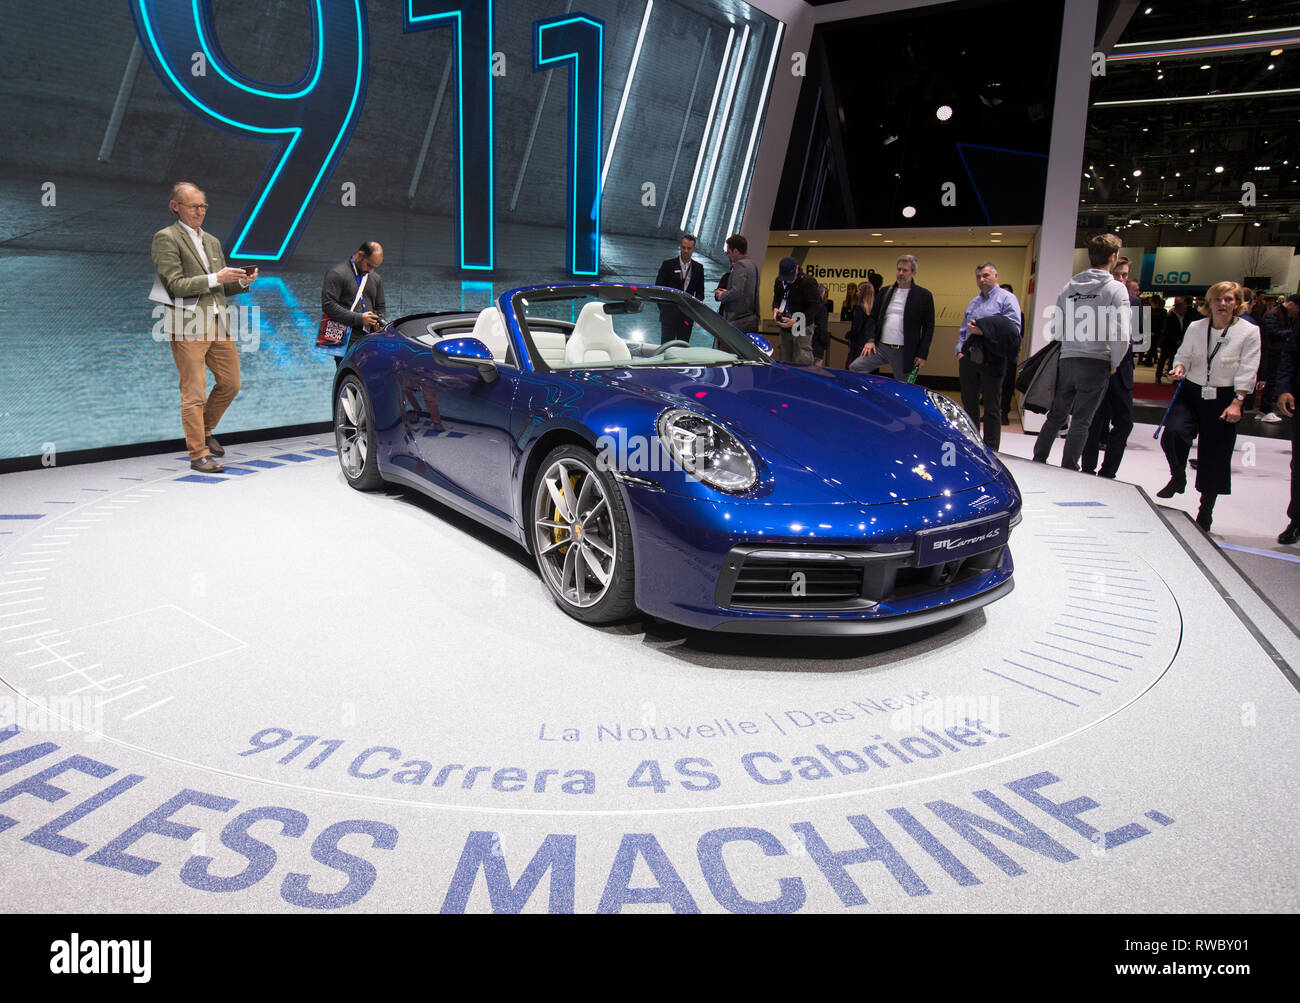 Geneva, Switzerland. 5th Mar, 2019. A Porsche 911 Carrera 4S Cabriolet is seen on the first press day of the 89th Geneva International Motor Show in Geneva, Switzerland, March 5, 2019. Featuring about 220 world exhibitors, the 89th Geneva International Motor Show will be opened to the public from March 7 to 17. Credit: Xu Jinquan/Xinhua/Alamy Live News Stock Photo